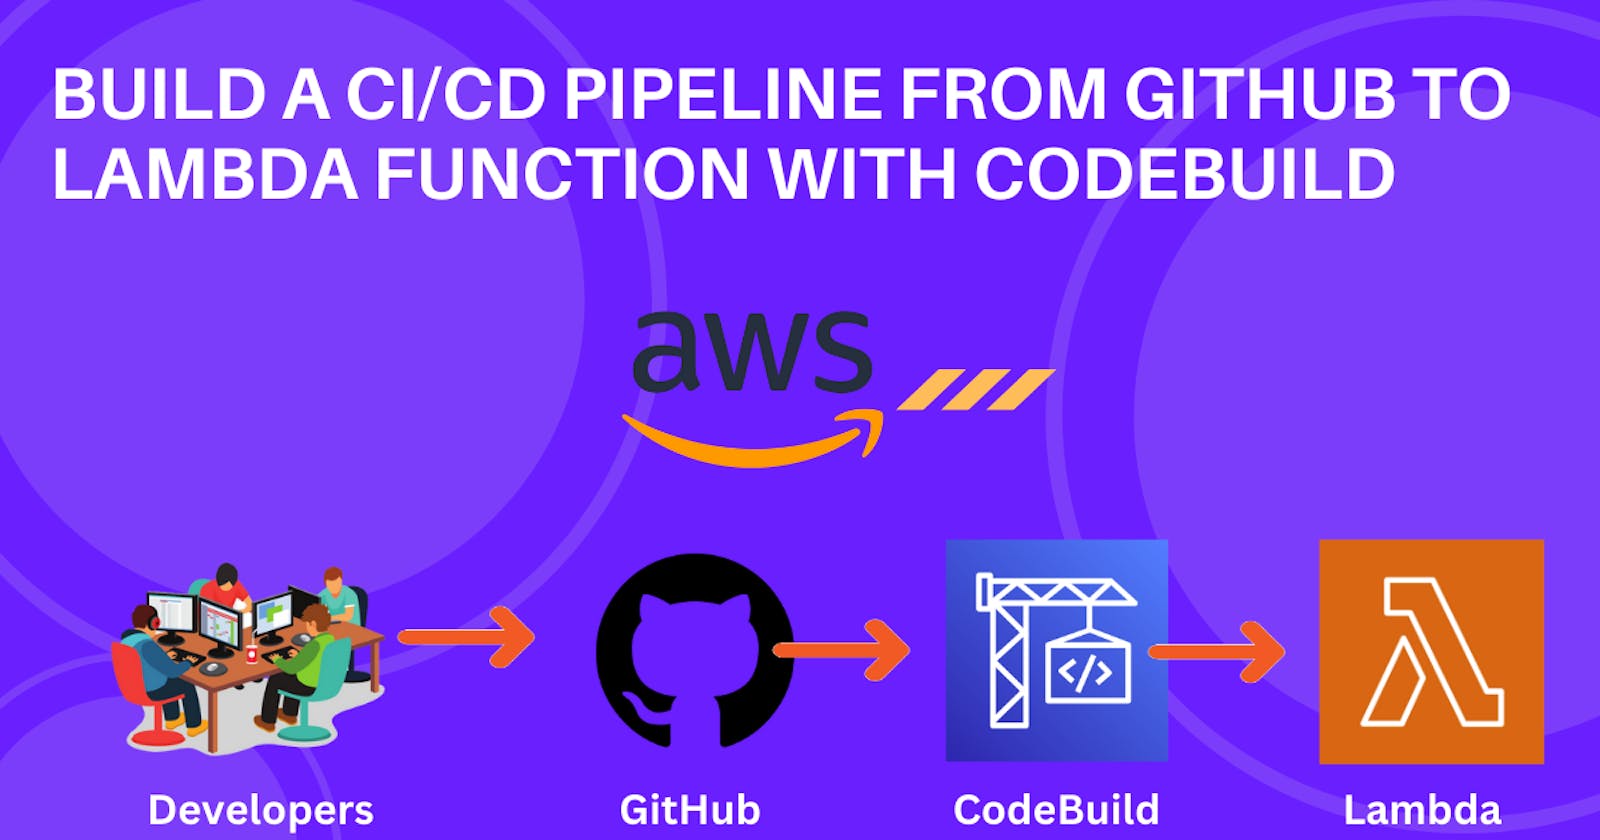 Build a CI/CD pipeline from GitHub to Lambda function with CodeBuild